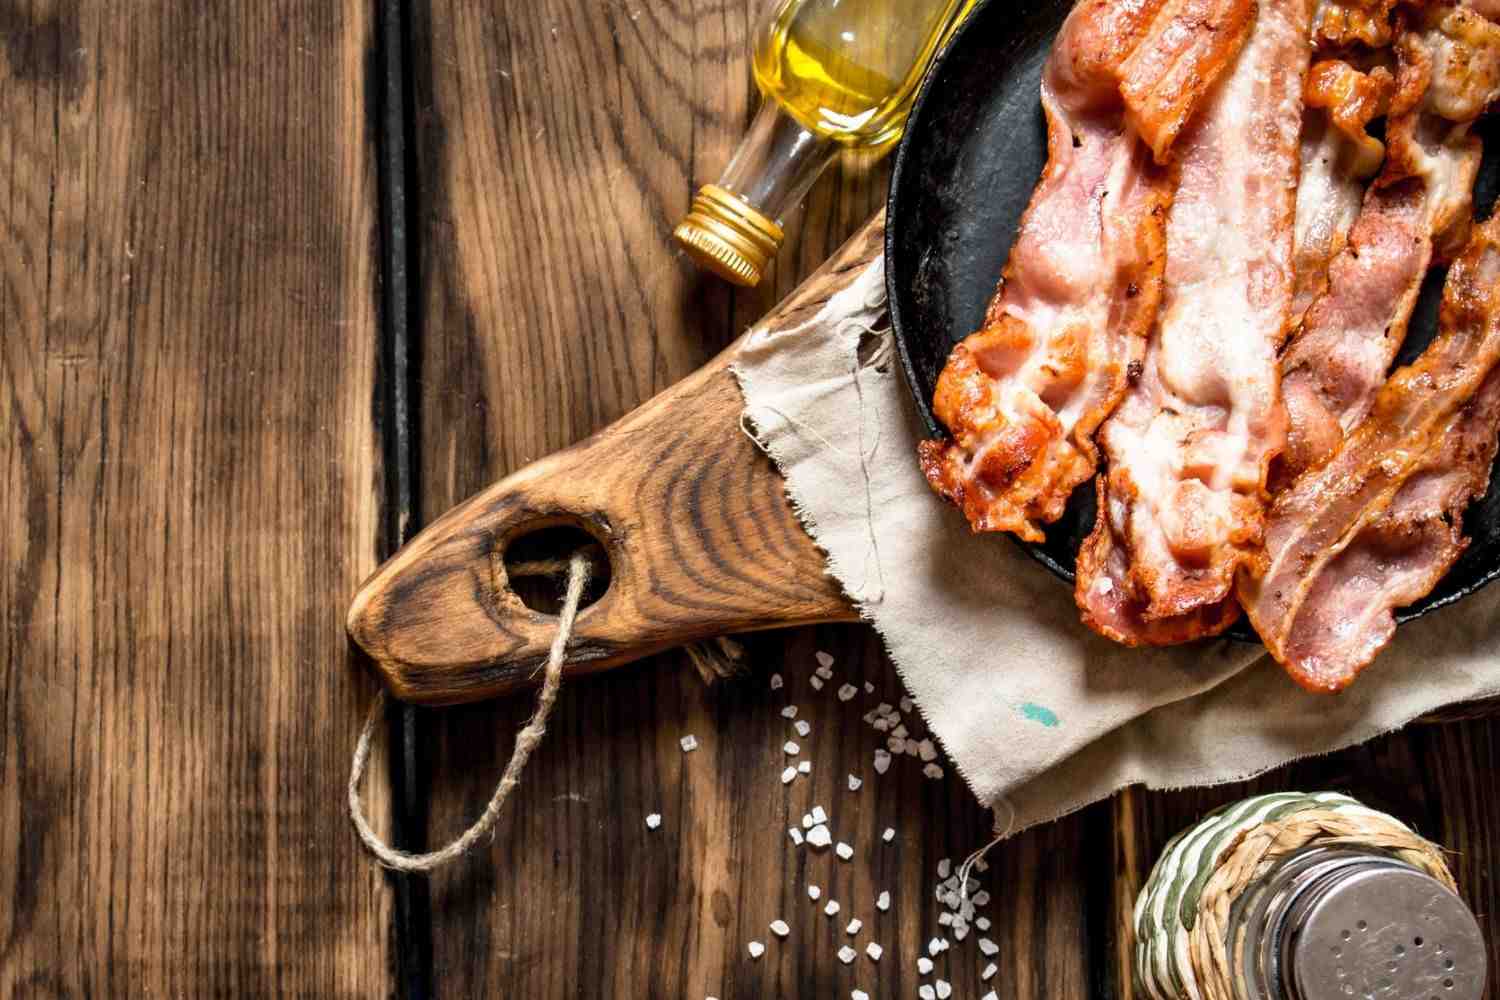 What is floppy bacon?